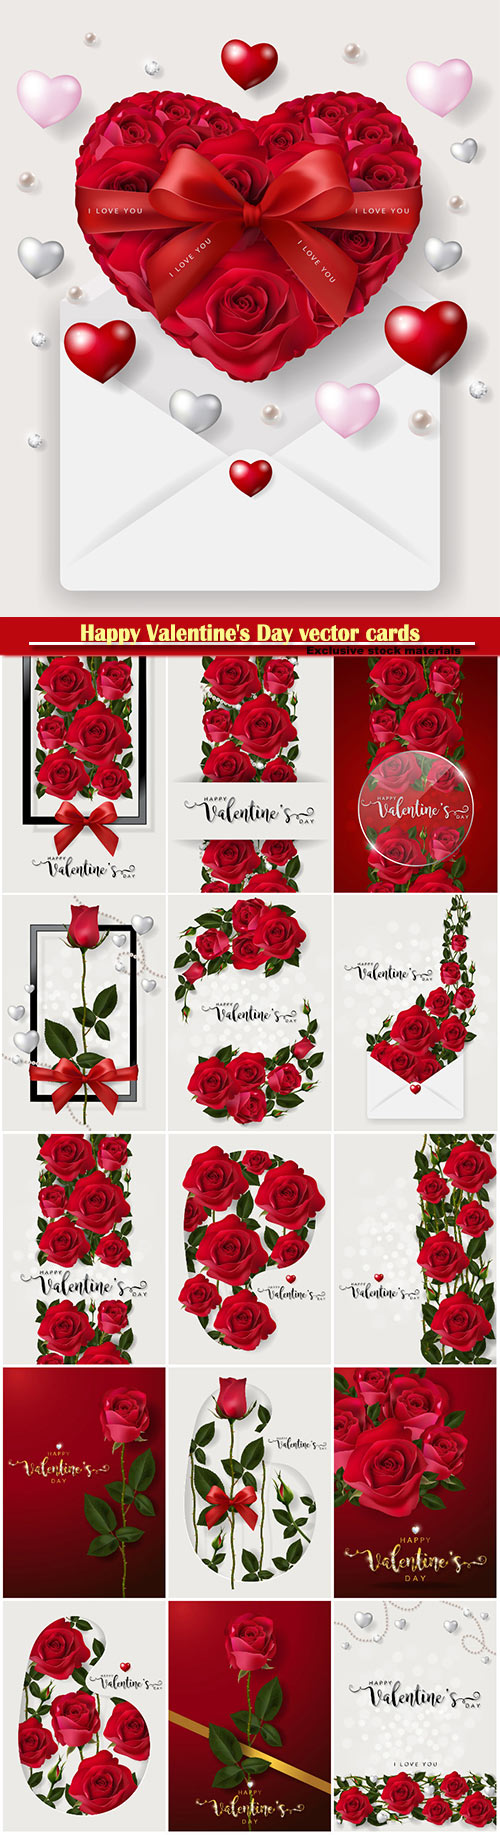 Happy Valentine's Day vector cards, red roses and hearts, romantic backgro ...